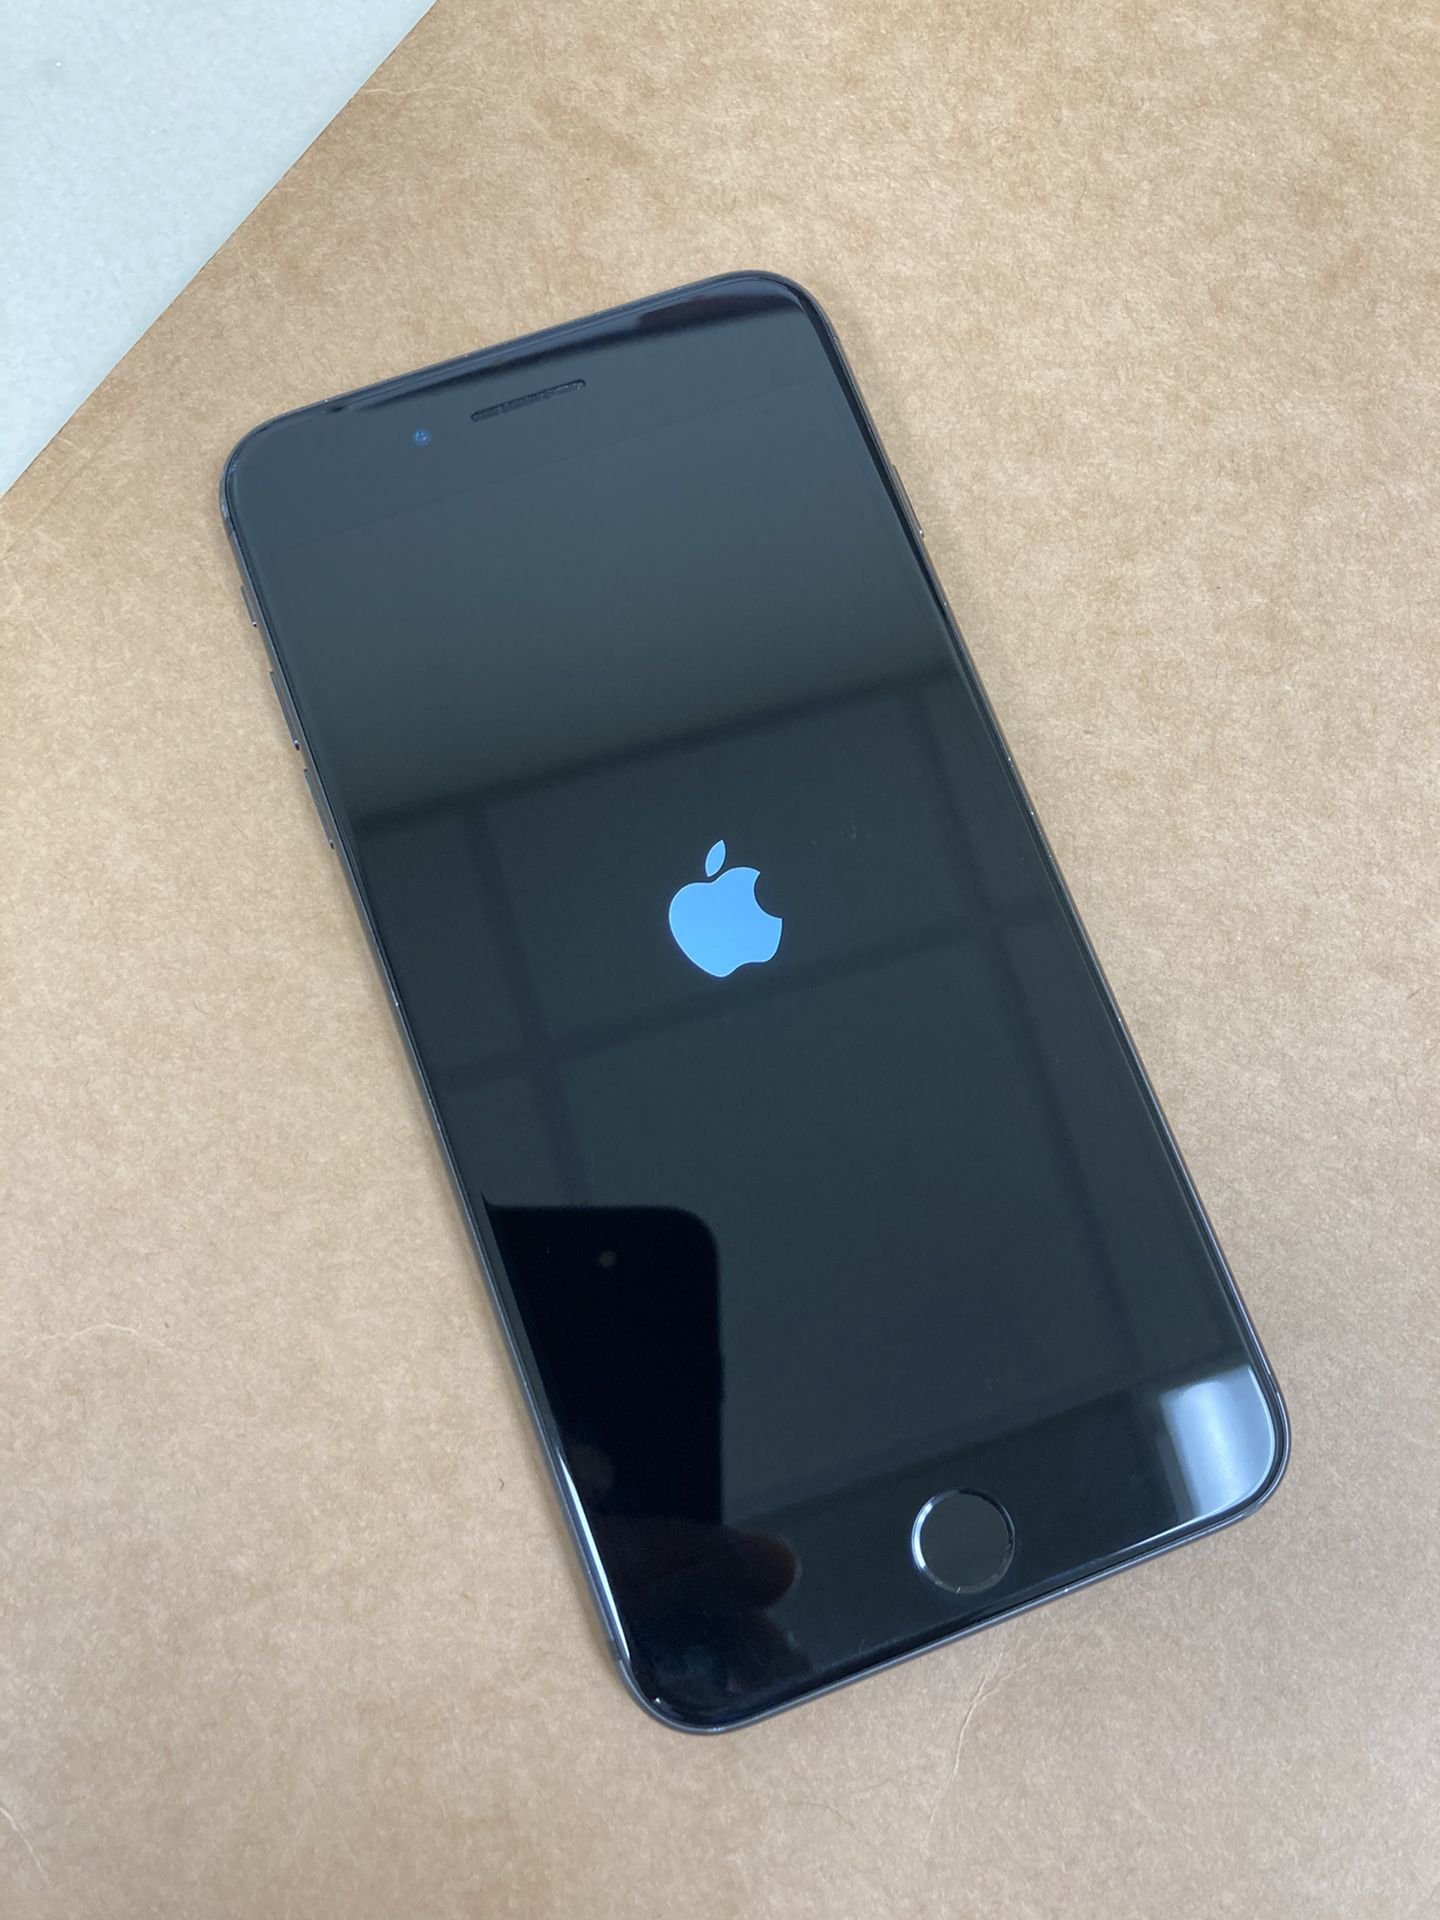 Unlocked iPhone 8 plus 256 gb in space gray color